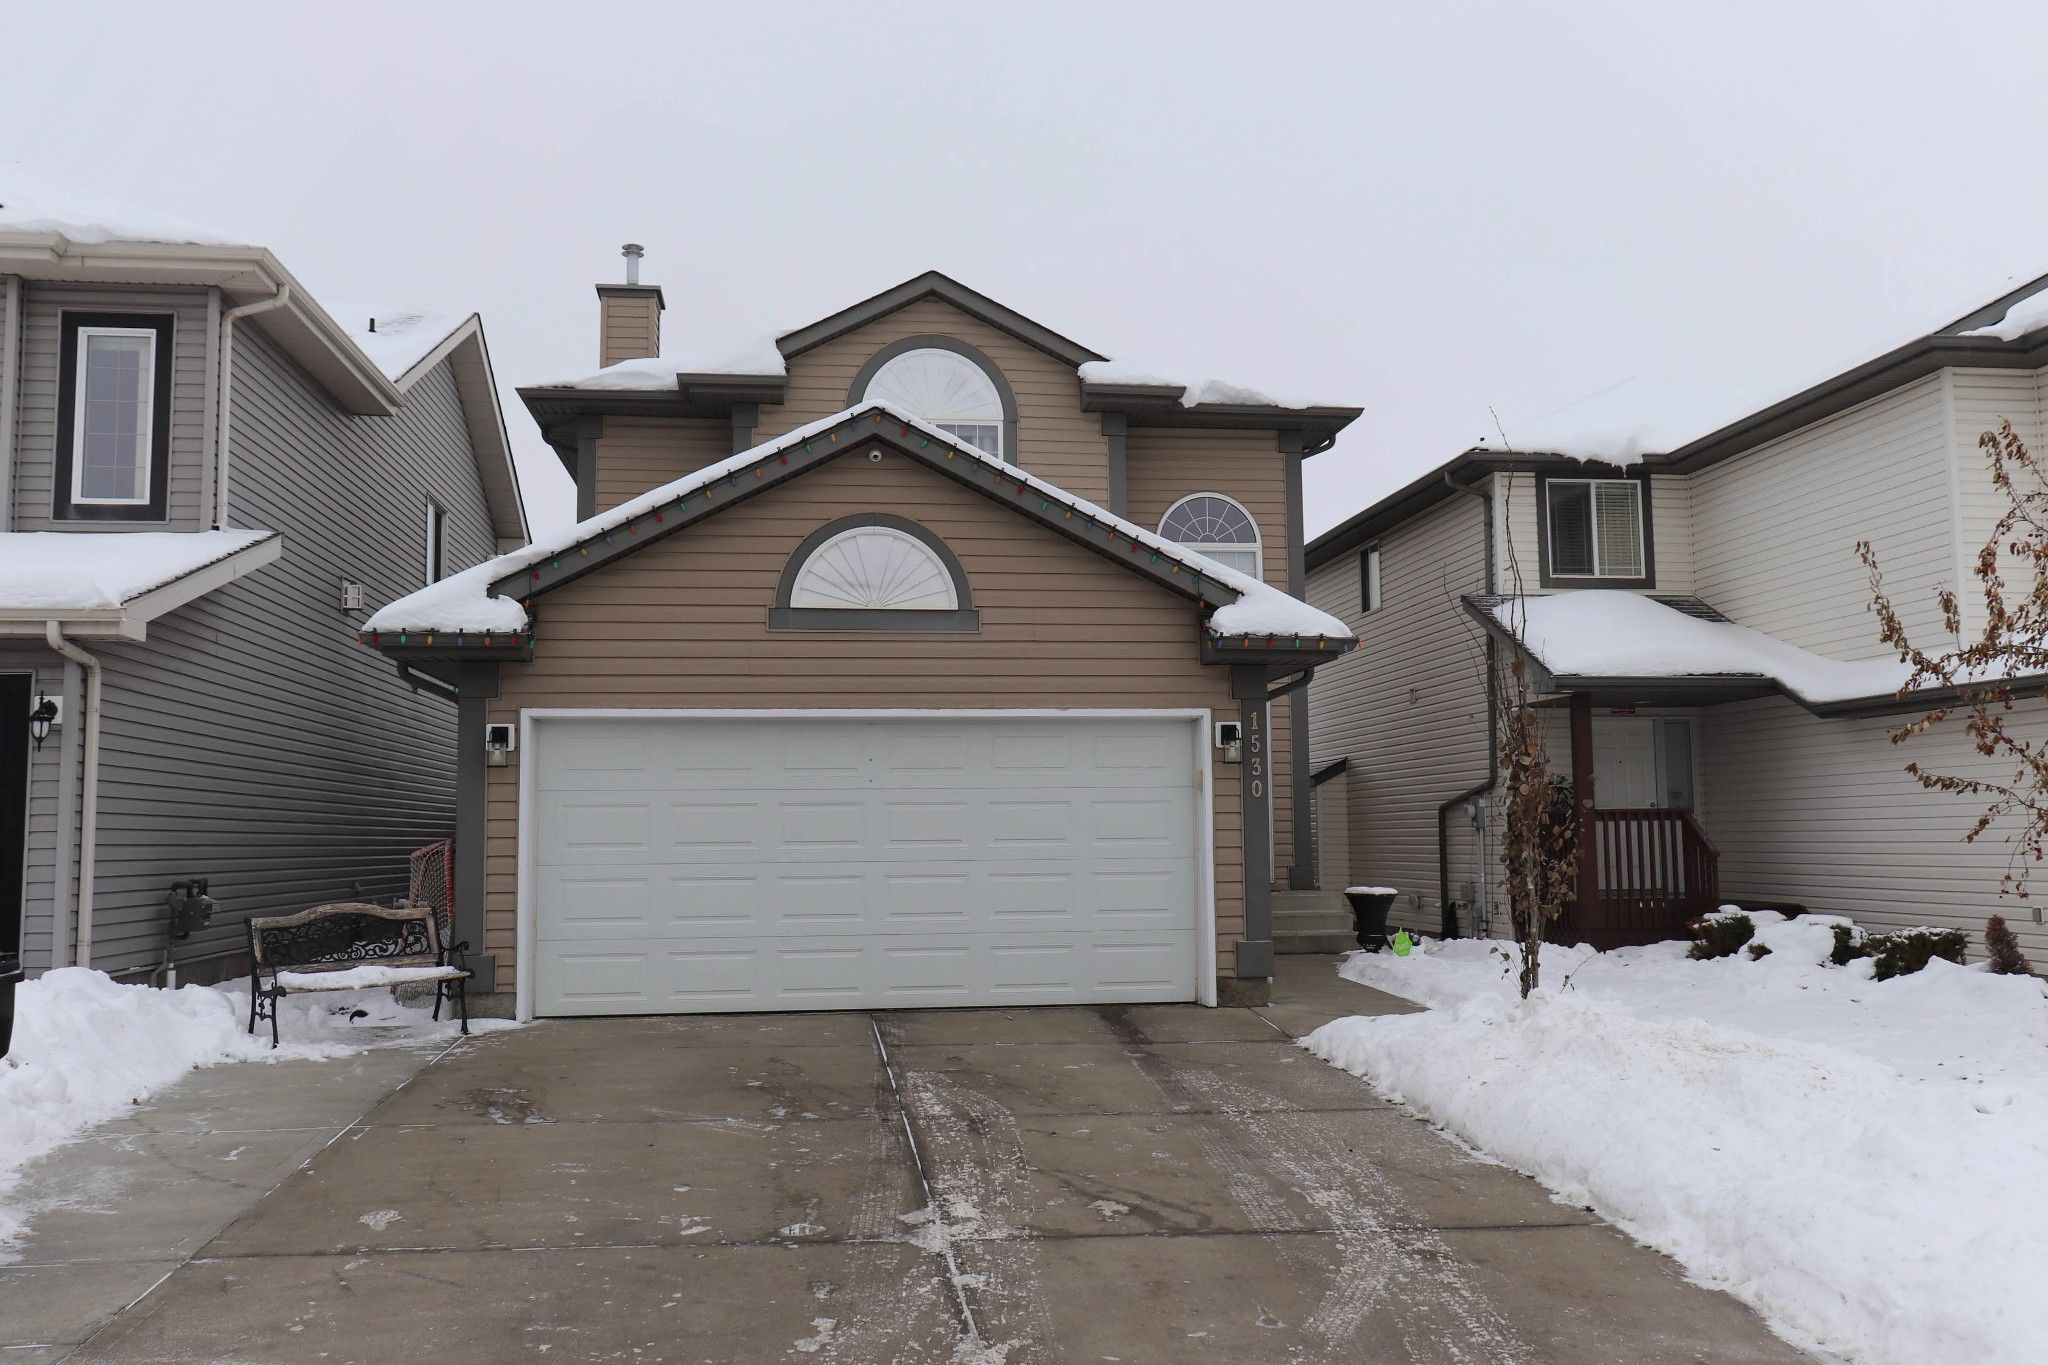 Main Photo: 1530 37b Ave in Edmonton: House for sale : MLS®# E4228182